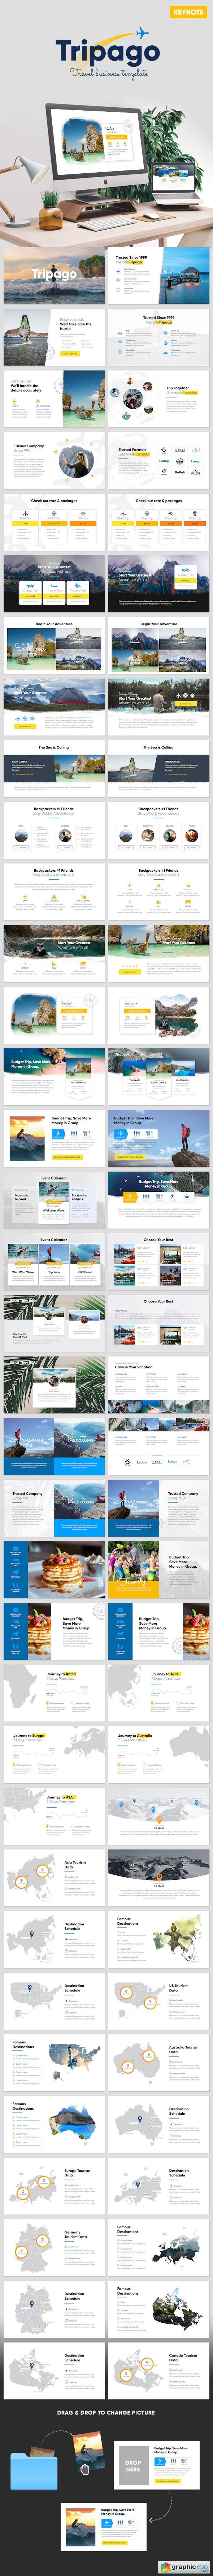 Tripago - Travelling Business Keynote Template